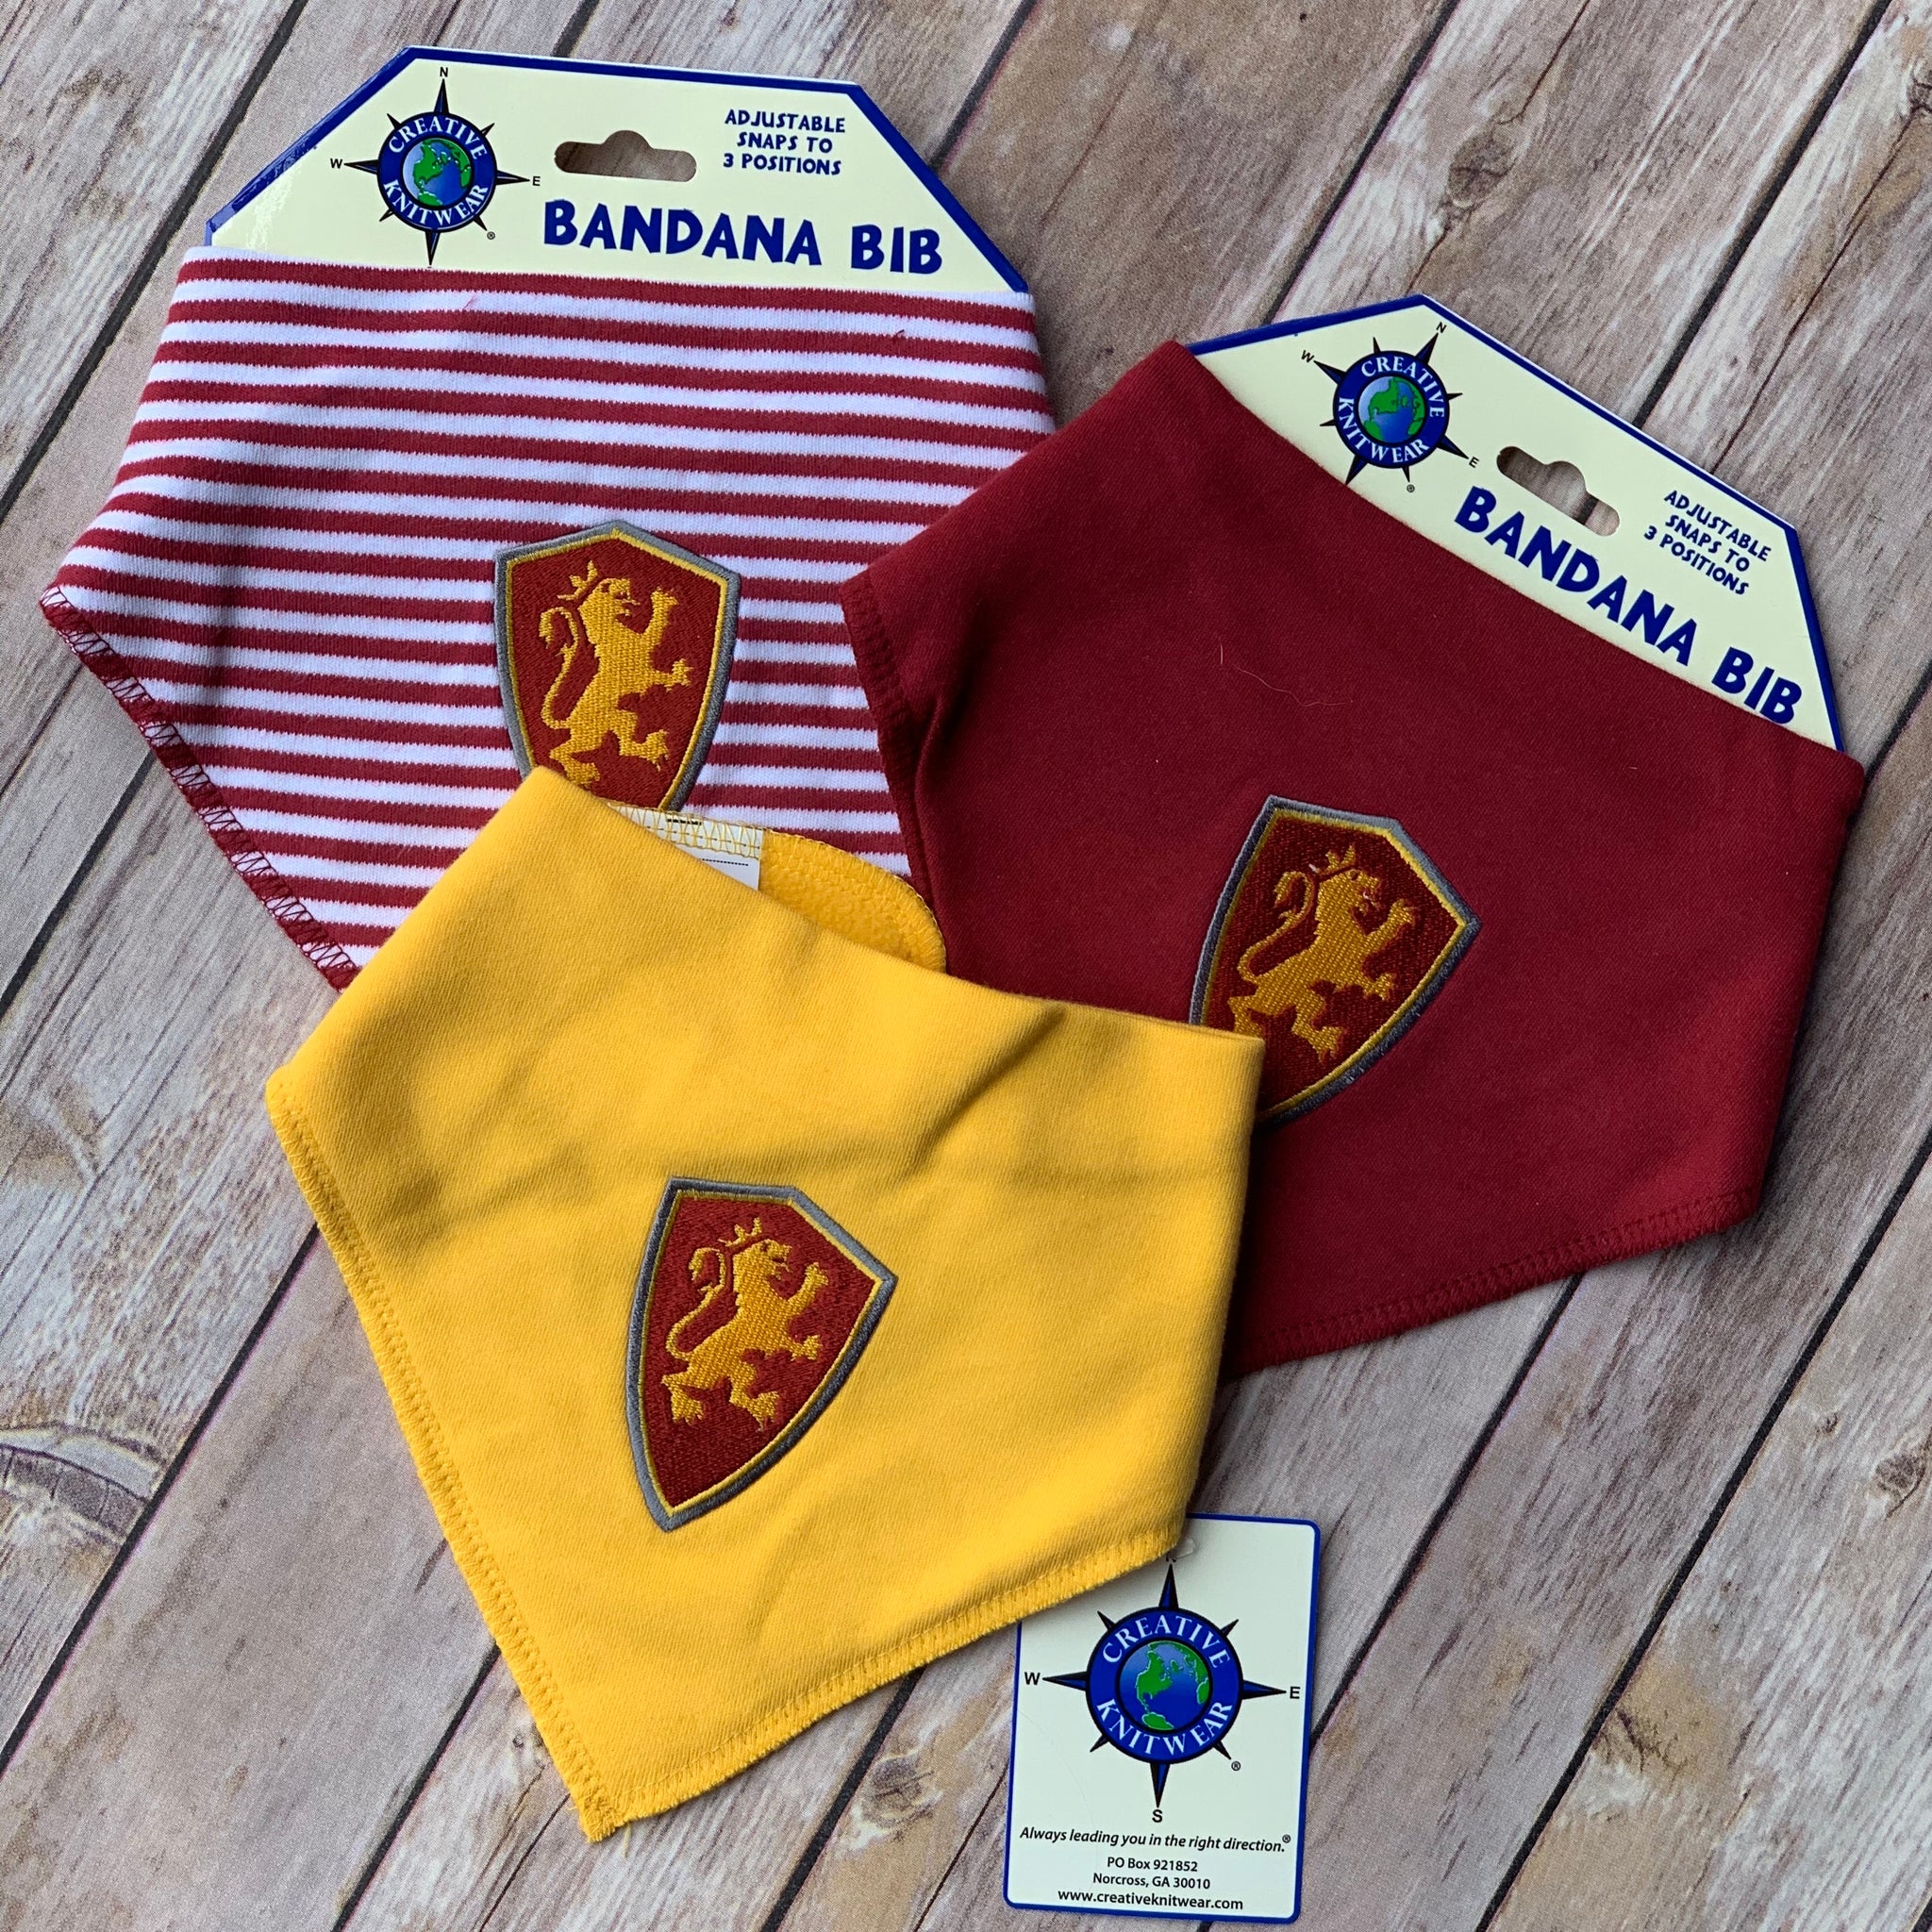 three bandanna bibs with red and yellow embroidered shield patch on front of each. The first big has red and white stripes, the second is solid yellow and the last is solid red